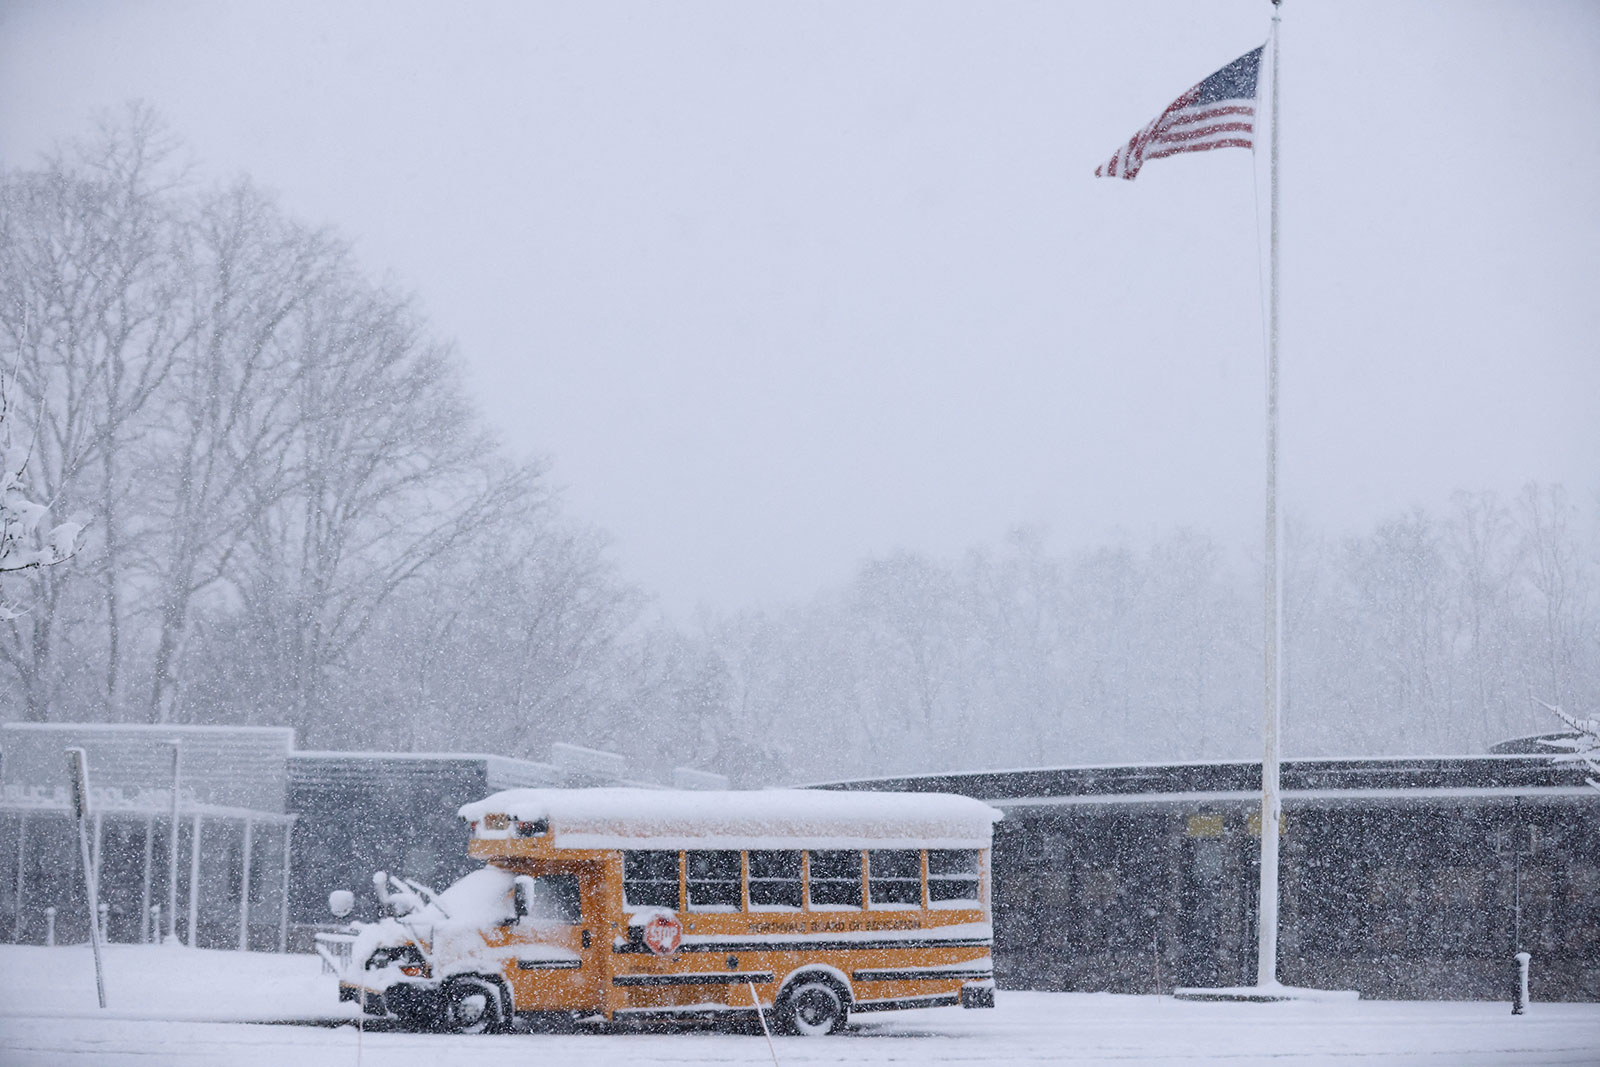 A school bus is covered in snow at the Northvale Public School in Northvale, New Jersey, on Tuesday. At least 5 inches of snow was reported in Bergen County, New Jersey.